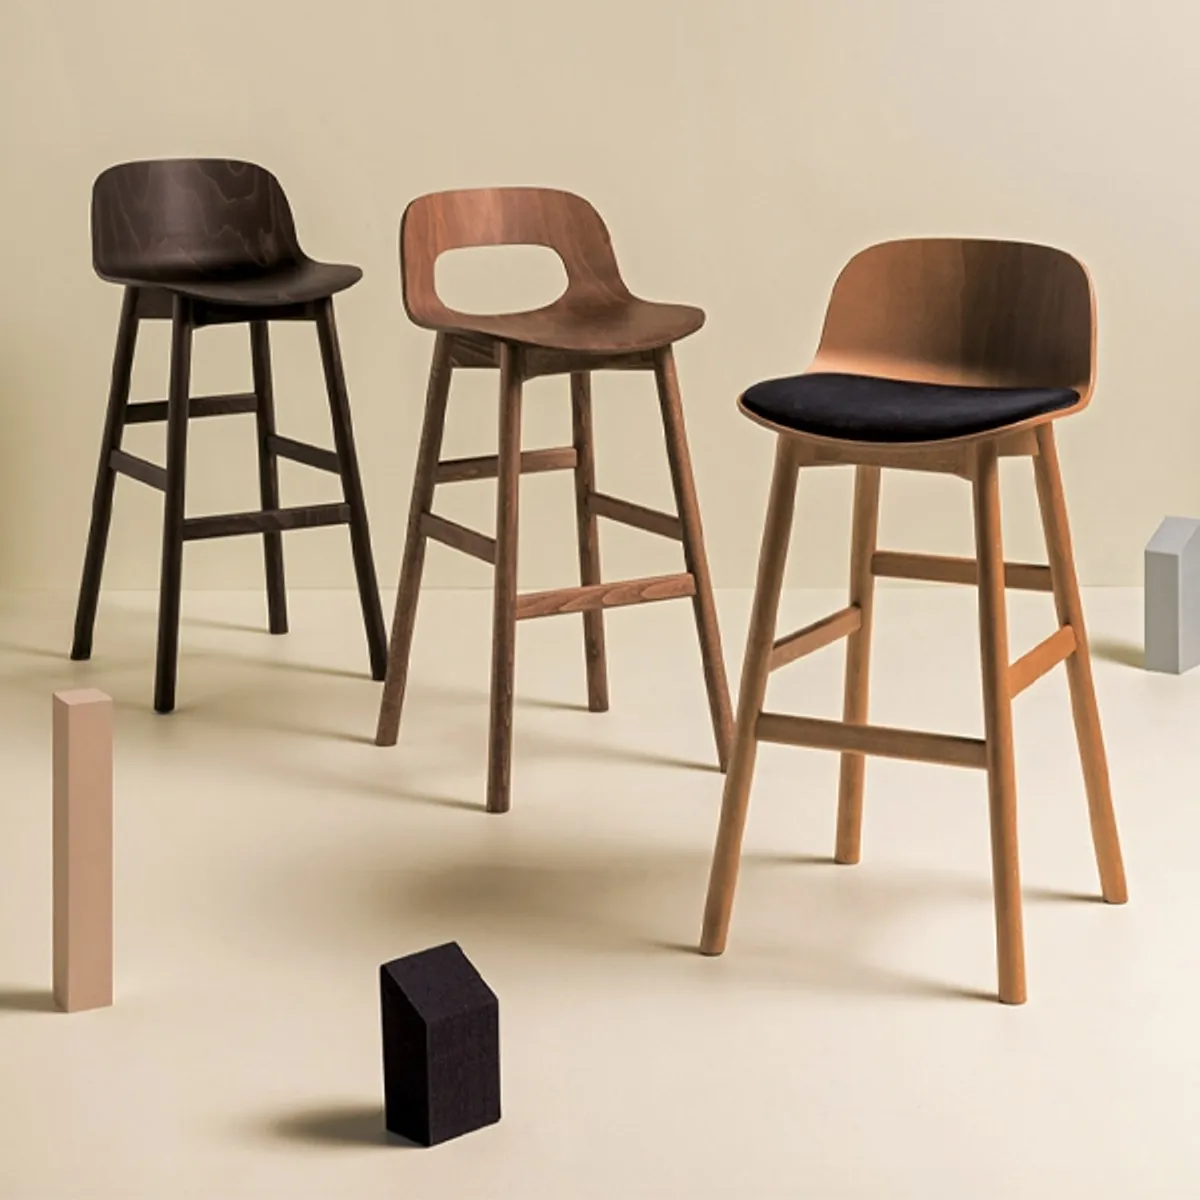 Gwen bar stools Inside Out Contracts